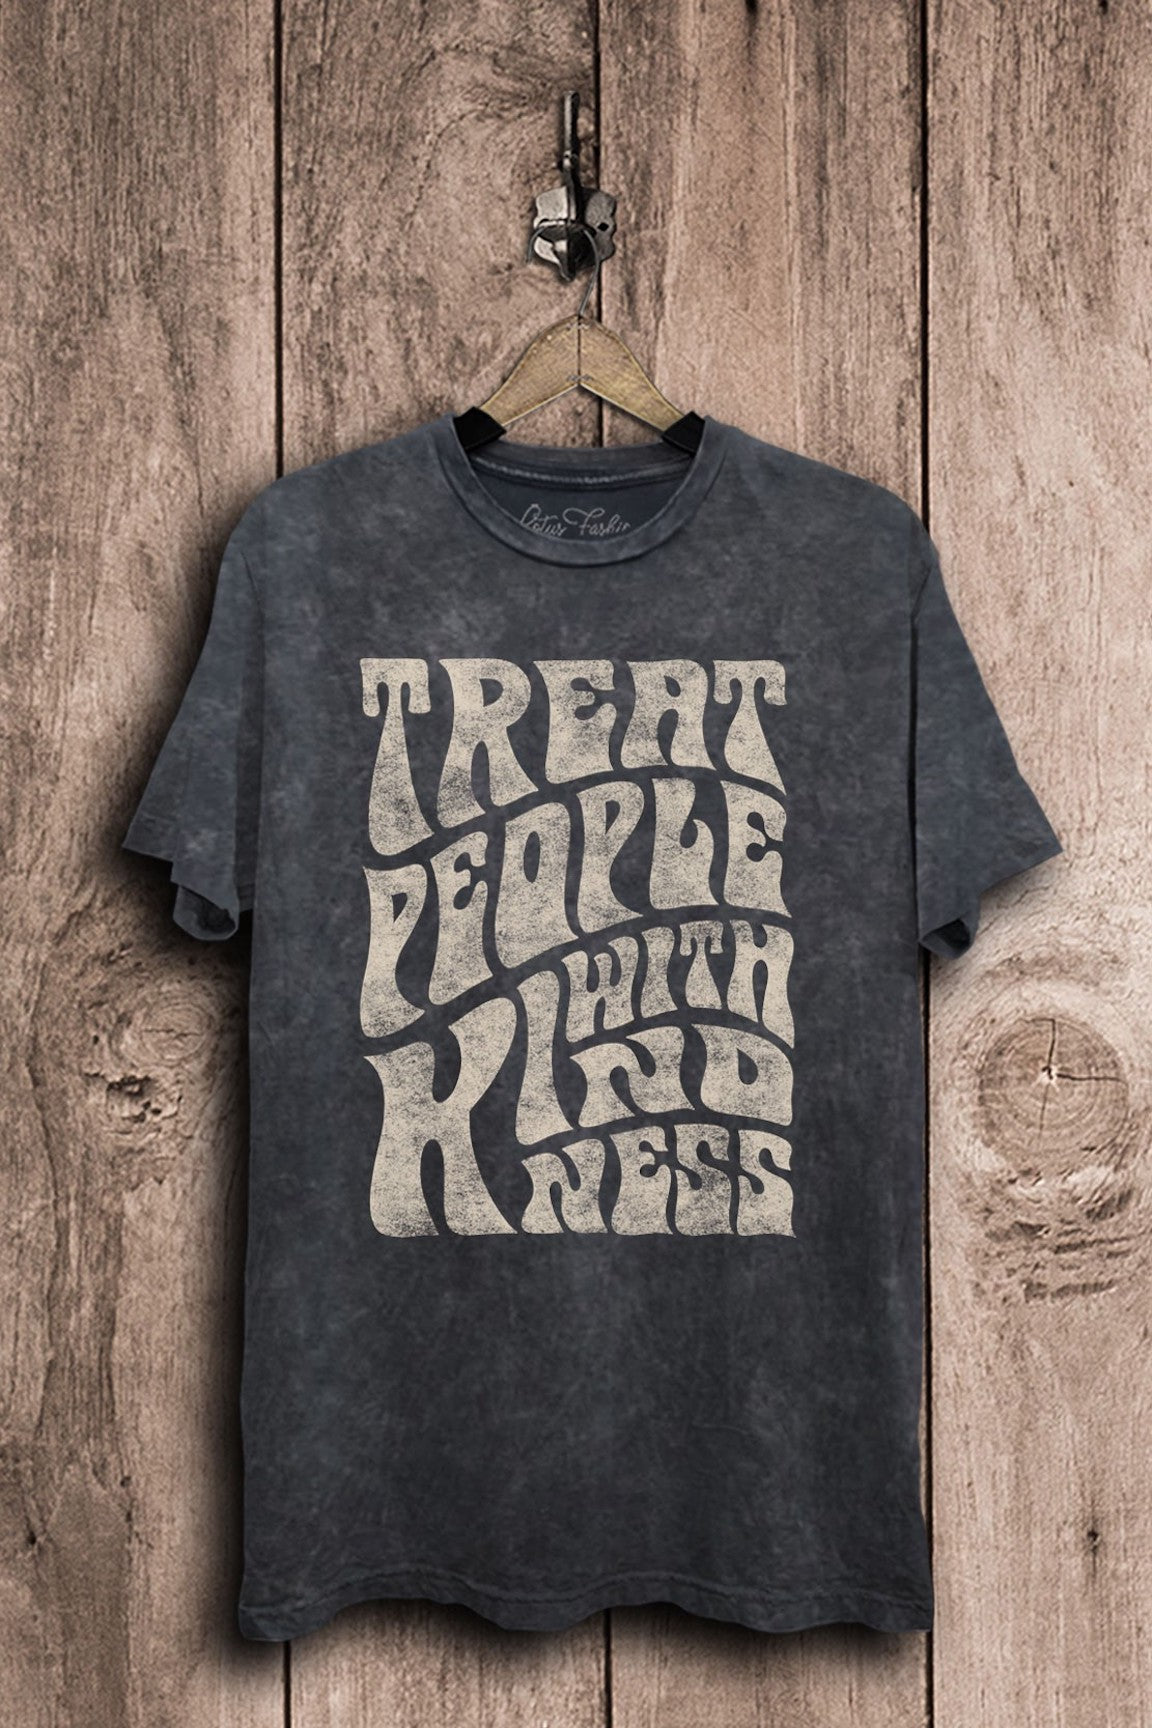 Treat People with Kindness Black Mineral Wash Graphic Tee